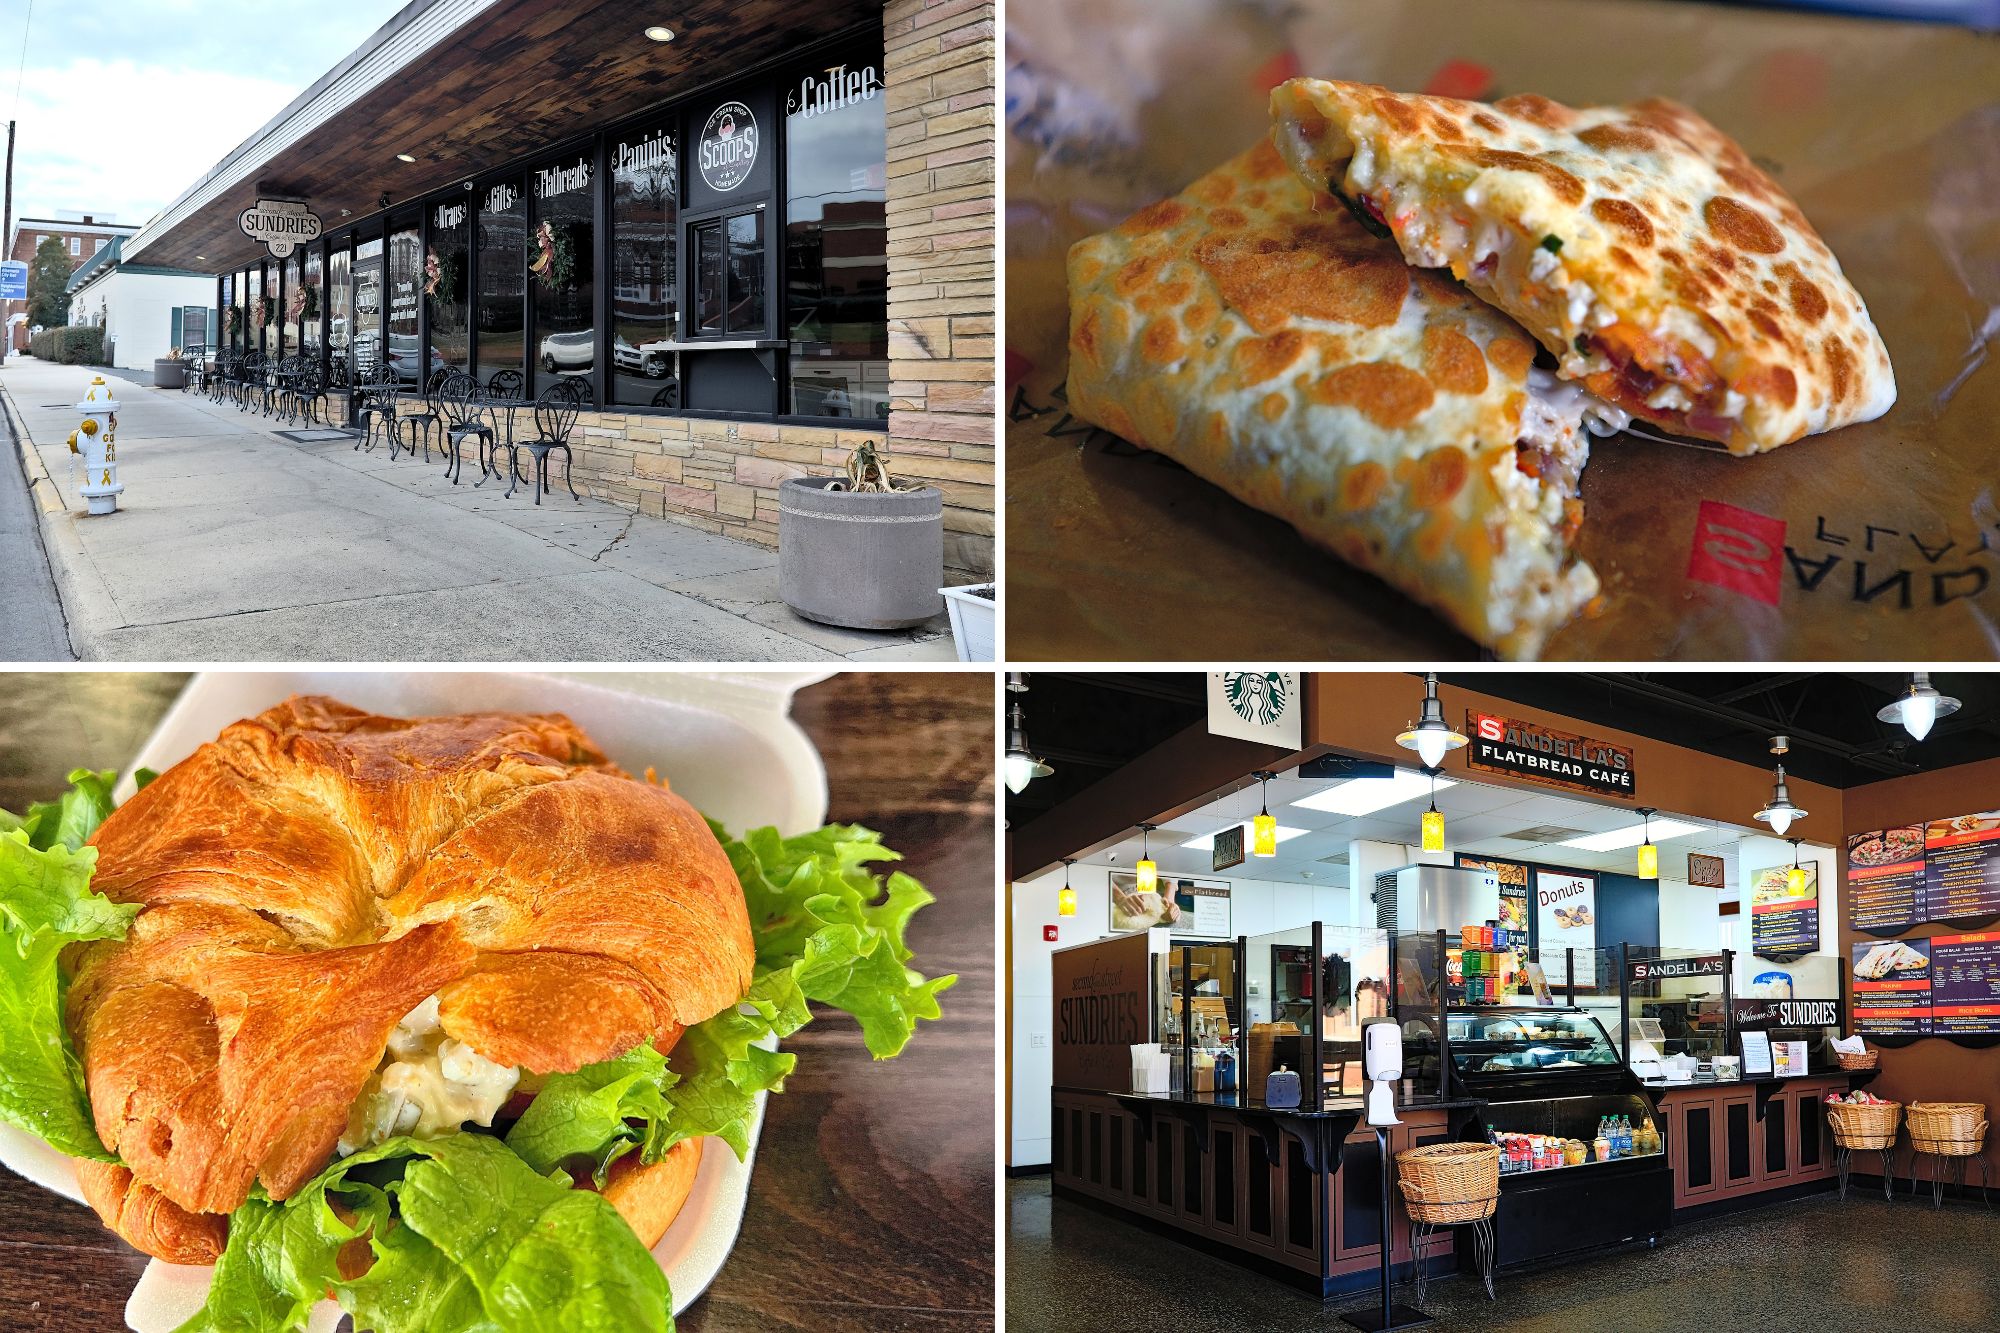 Collage of images of the interior and exterior of Second Street Sundries, as well as two menu items (a chicken salad sandwich and a wrap)